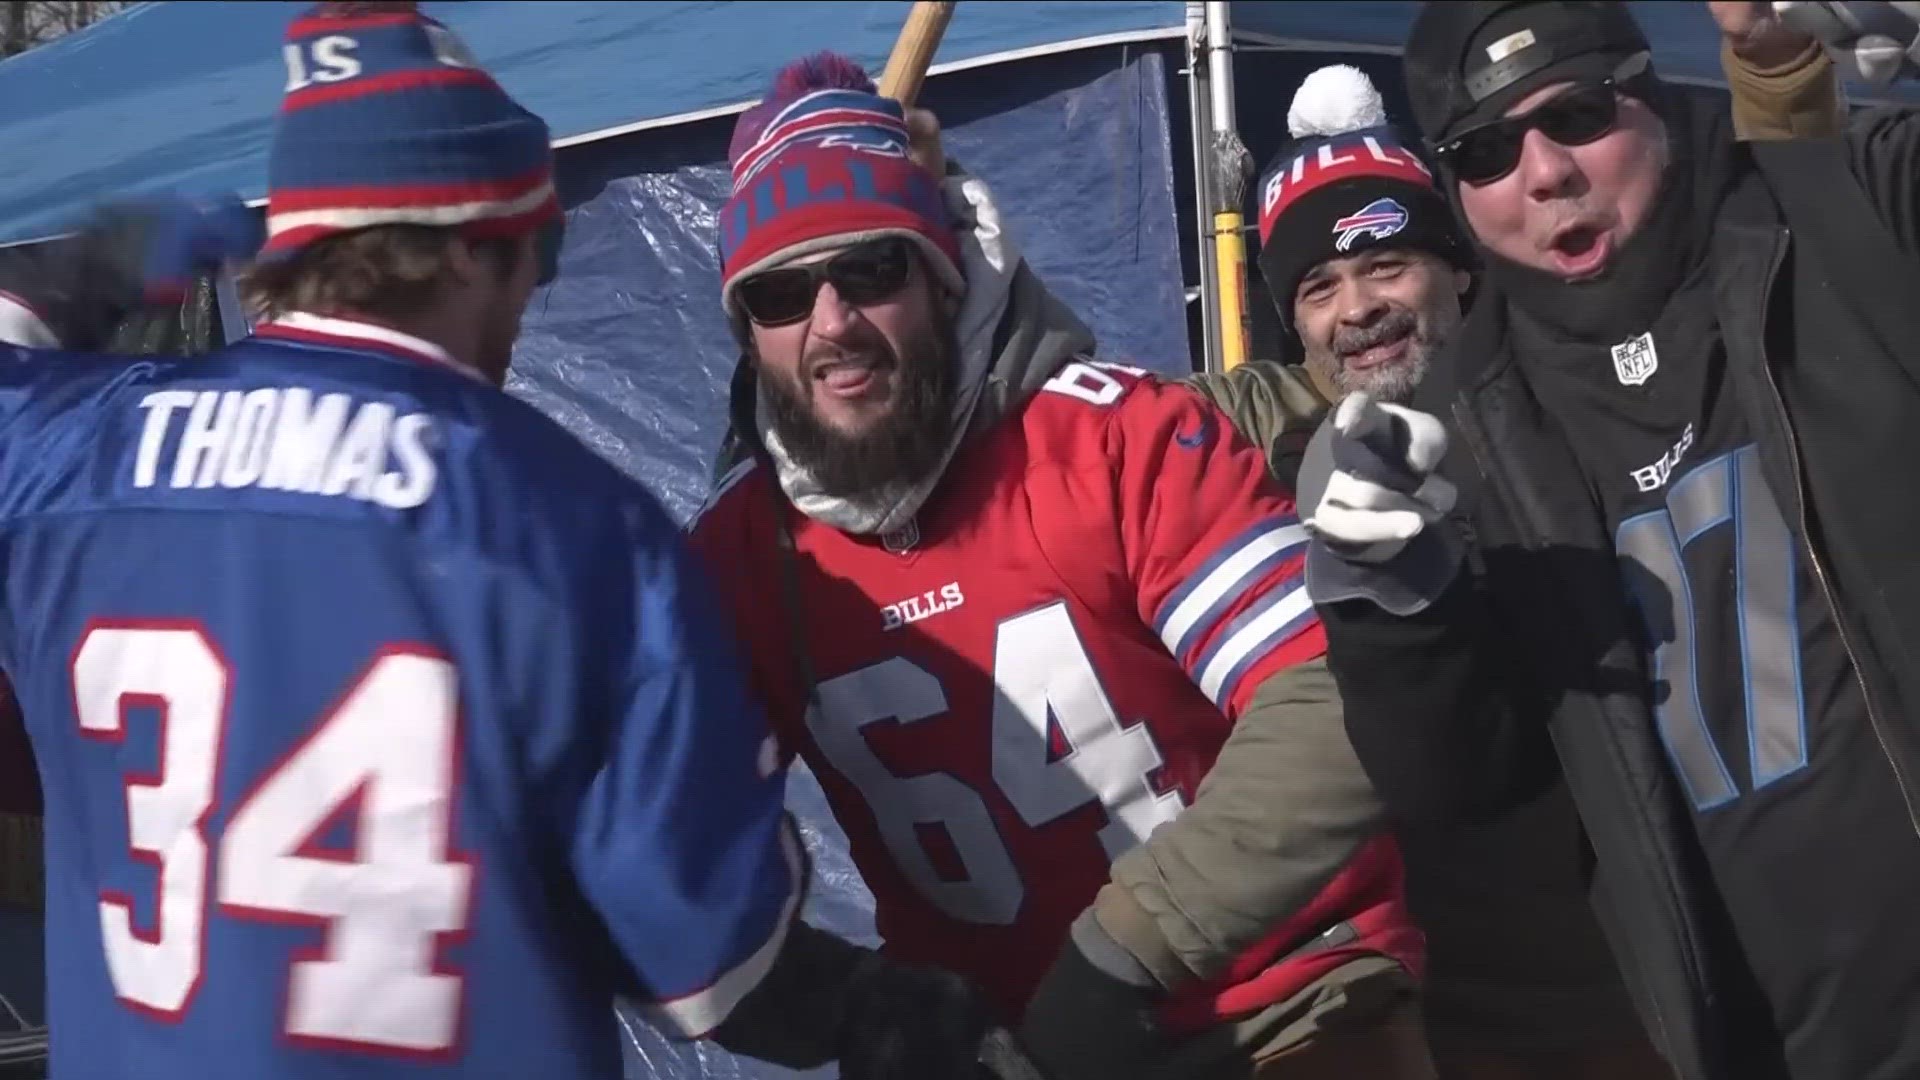 Bills fans brave snow and cold for playoff game